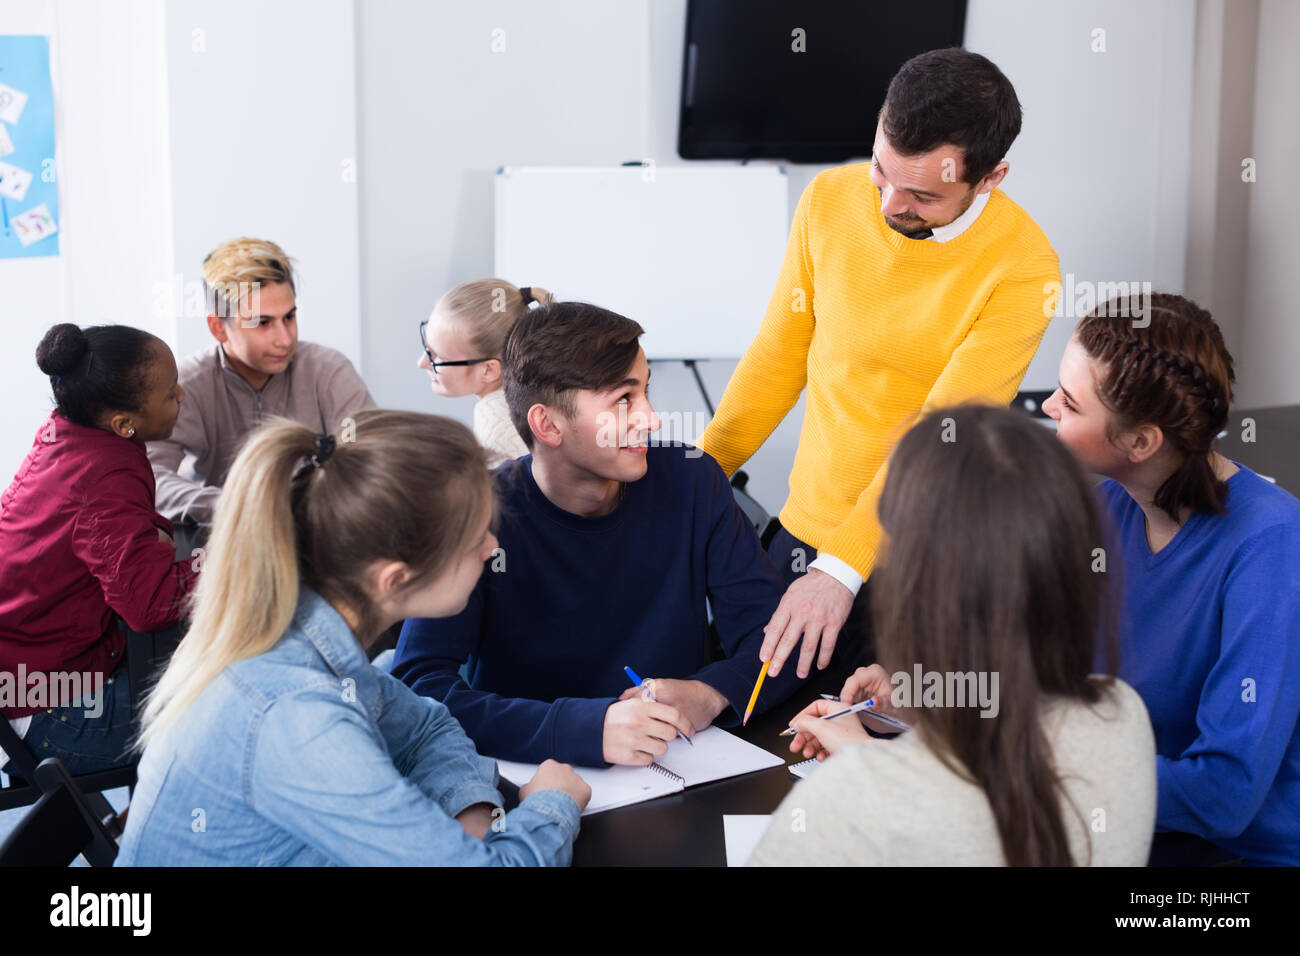 Man teacher is monitoring students during exam in class. Stock Photo